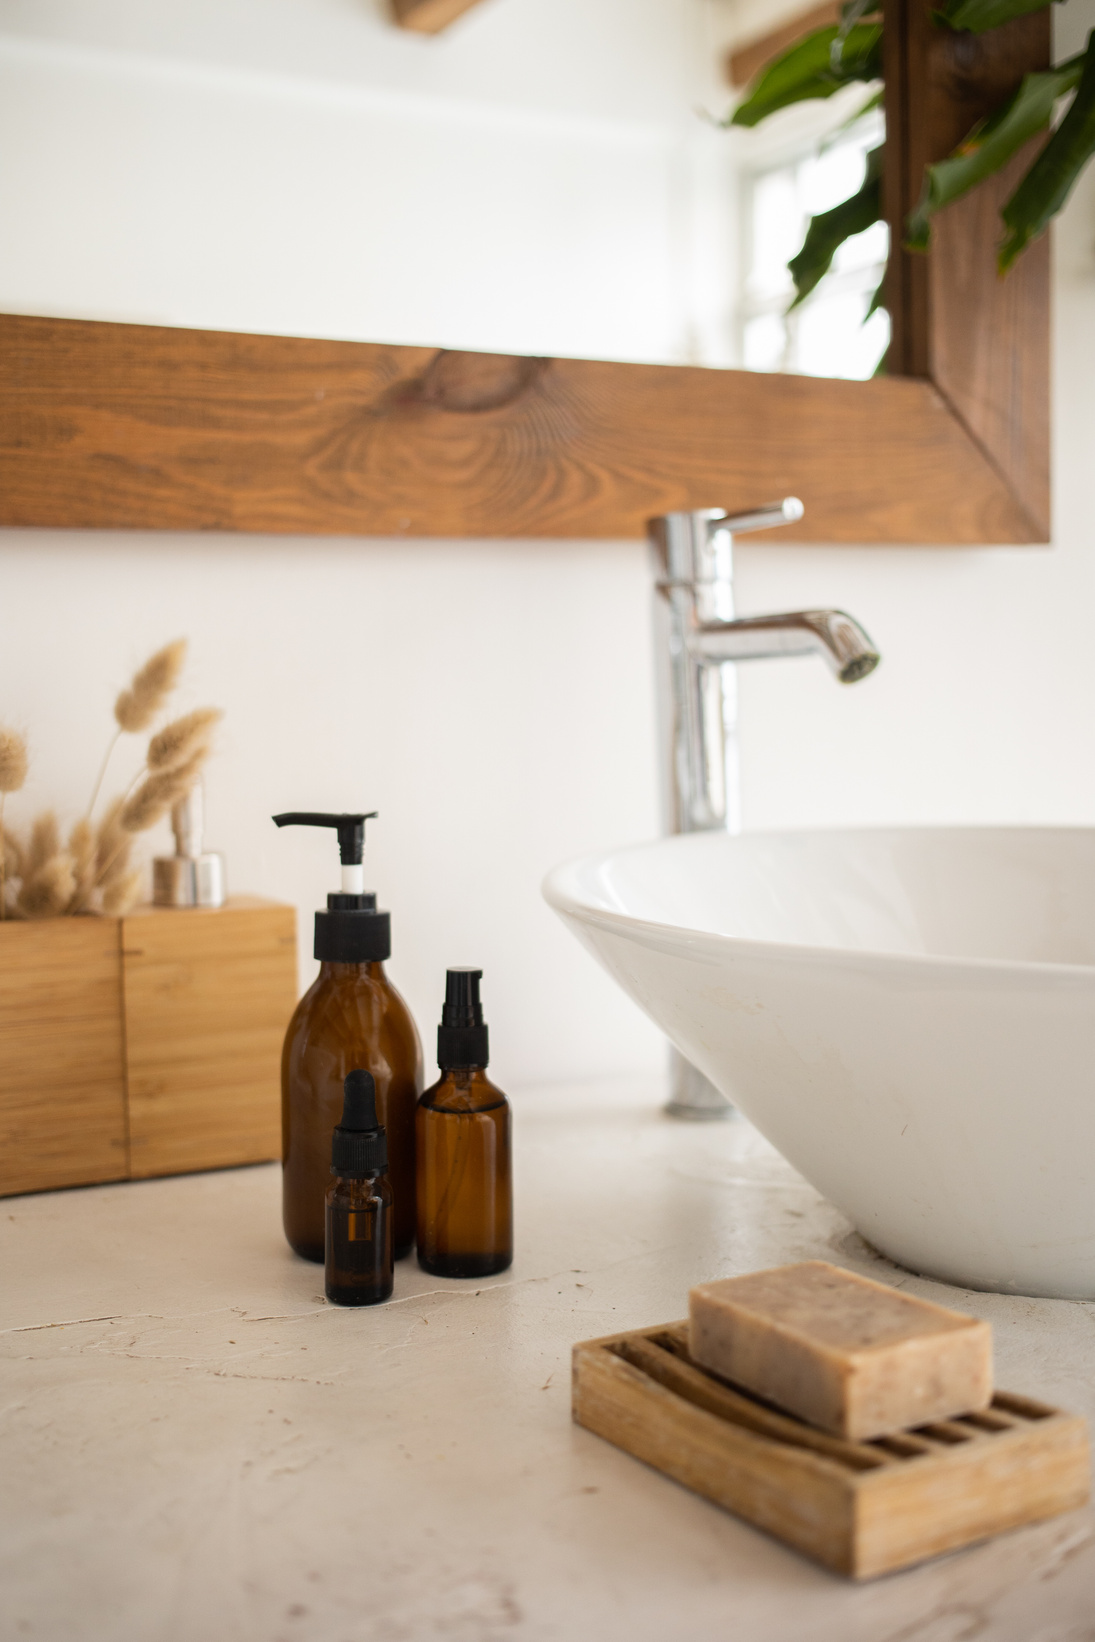 Sink with skincare products in bathroom